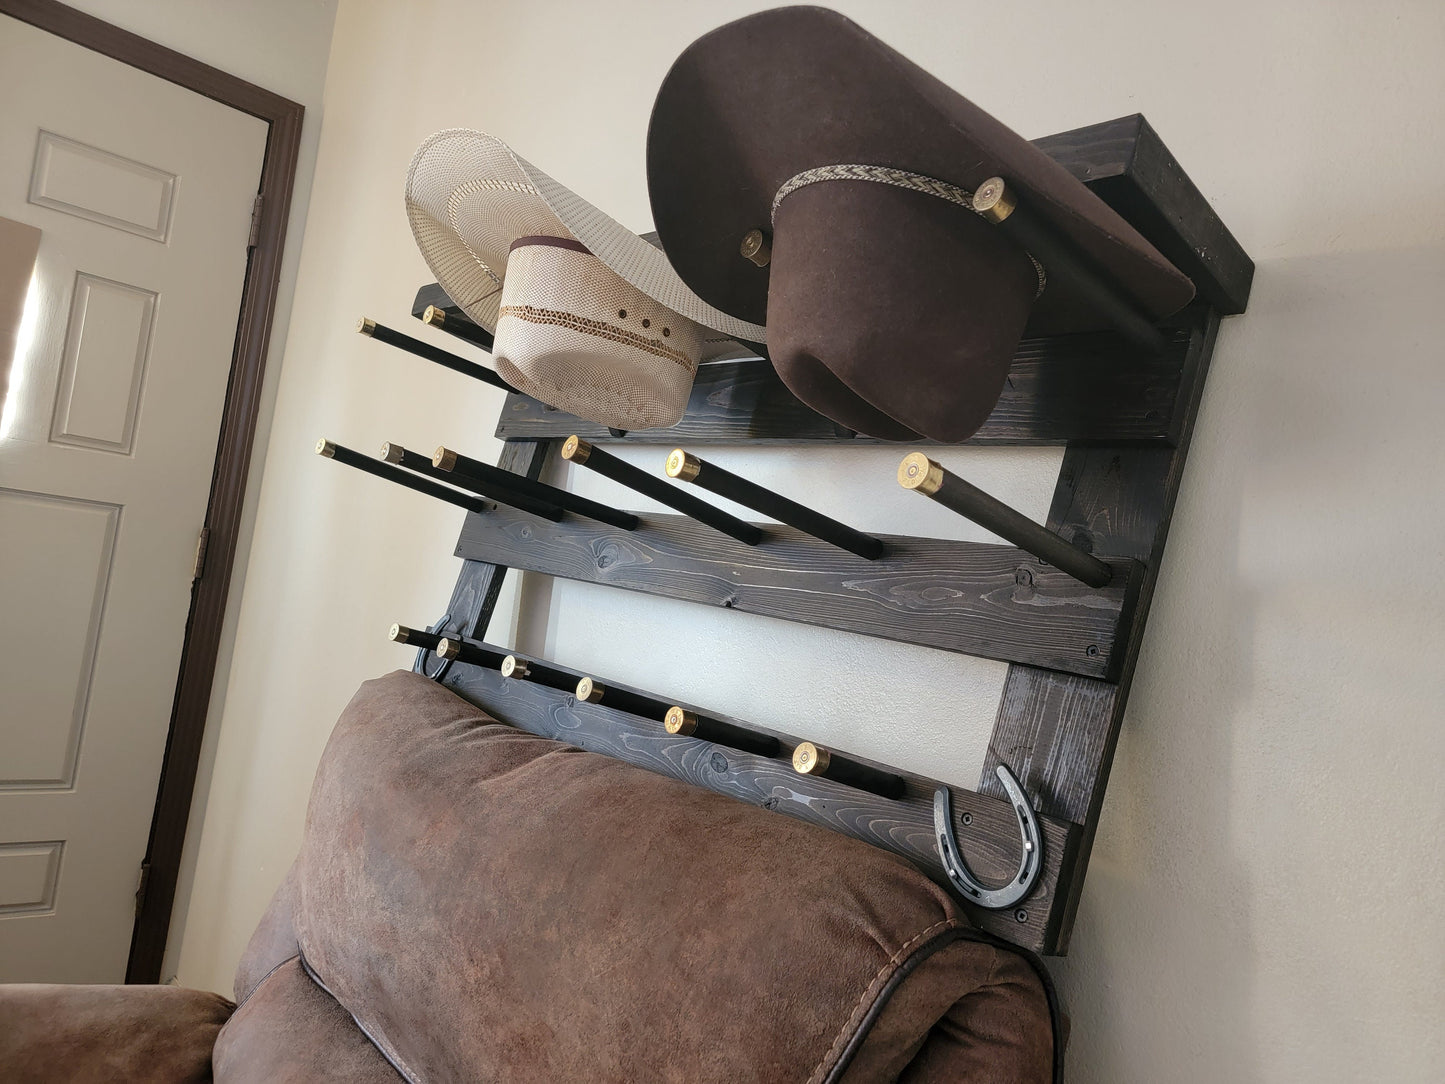 6HWS - Cowboy Hat Rack - 6 Hatter with Shelf - Horizontal Functional Western Decor Cowboy hat hanger, rack for wall, cowboy wooden display, mothers day, Easter